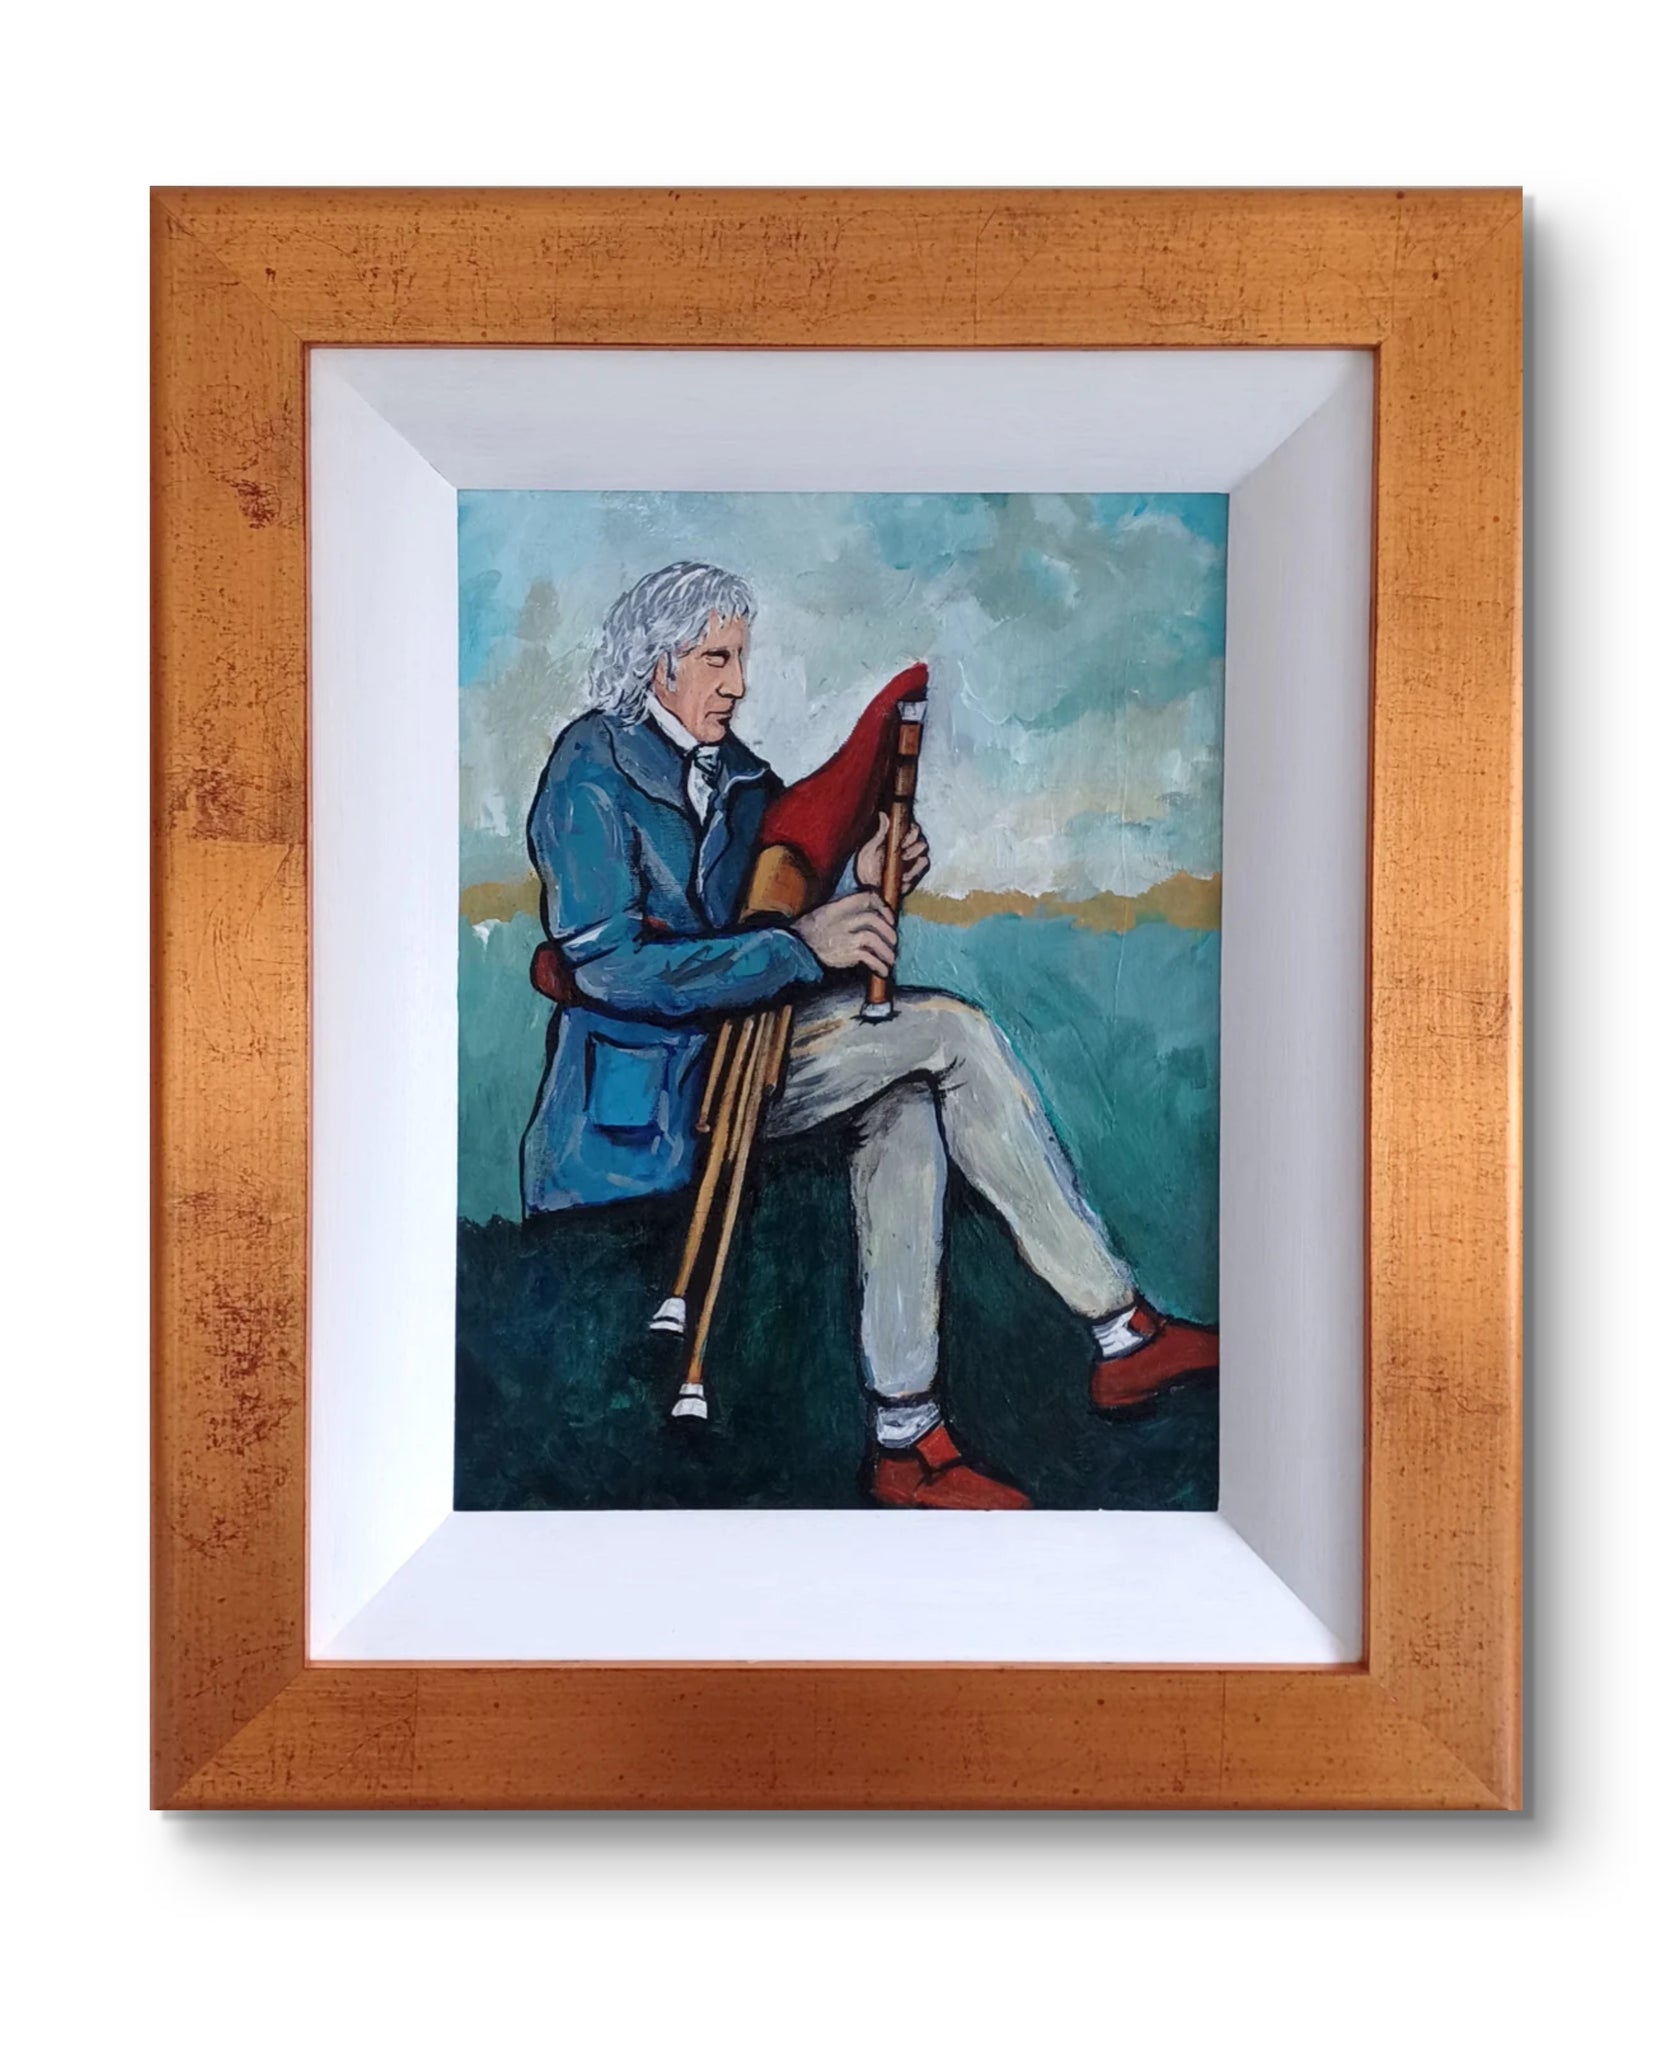 Captivating painting of blind Irish Uilleann piper Pádraig Ó Briain by artist Ó Maoláin, framed in gold with a white scoop inlay. Painting size: 40cm x 30cm, frame size: 60cm x 50cm, depth: 3.5cm. Comes ready to hang with included fittings.